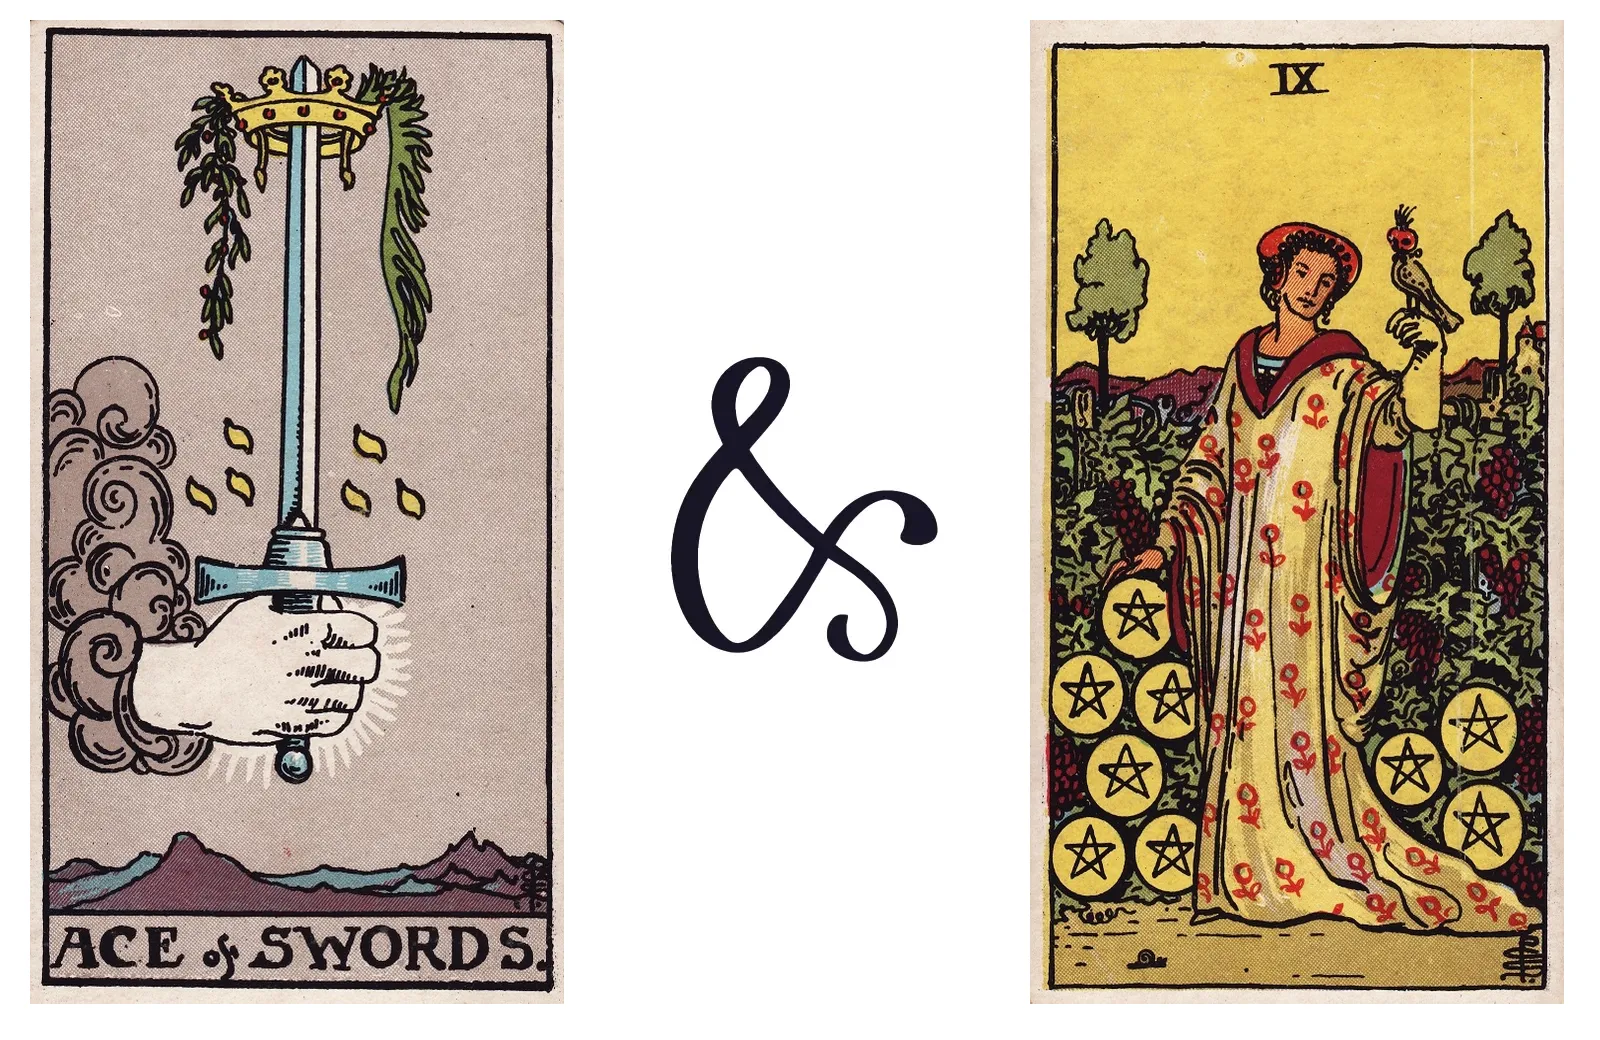 Ace of Swords and Nine of Pentacles